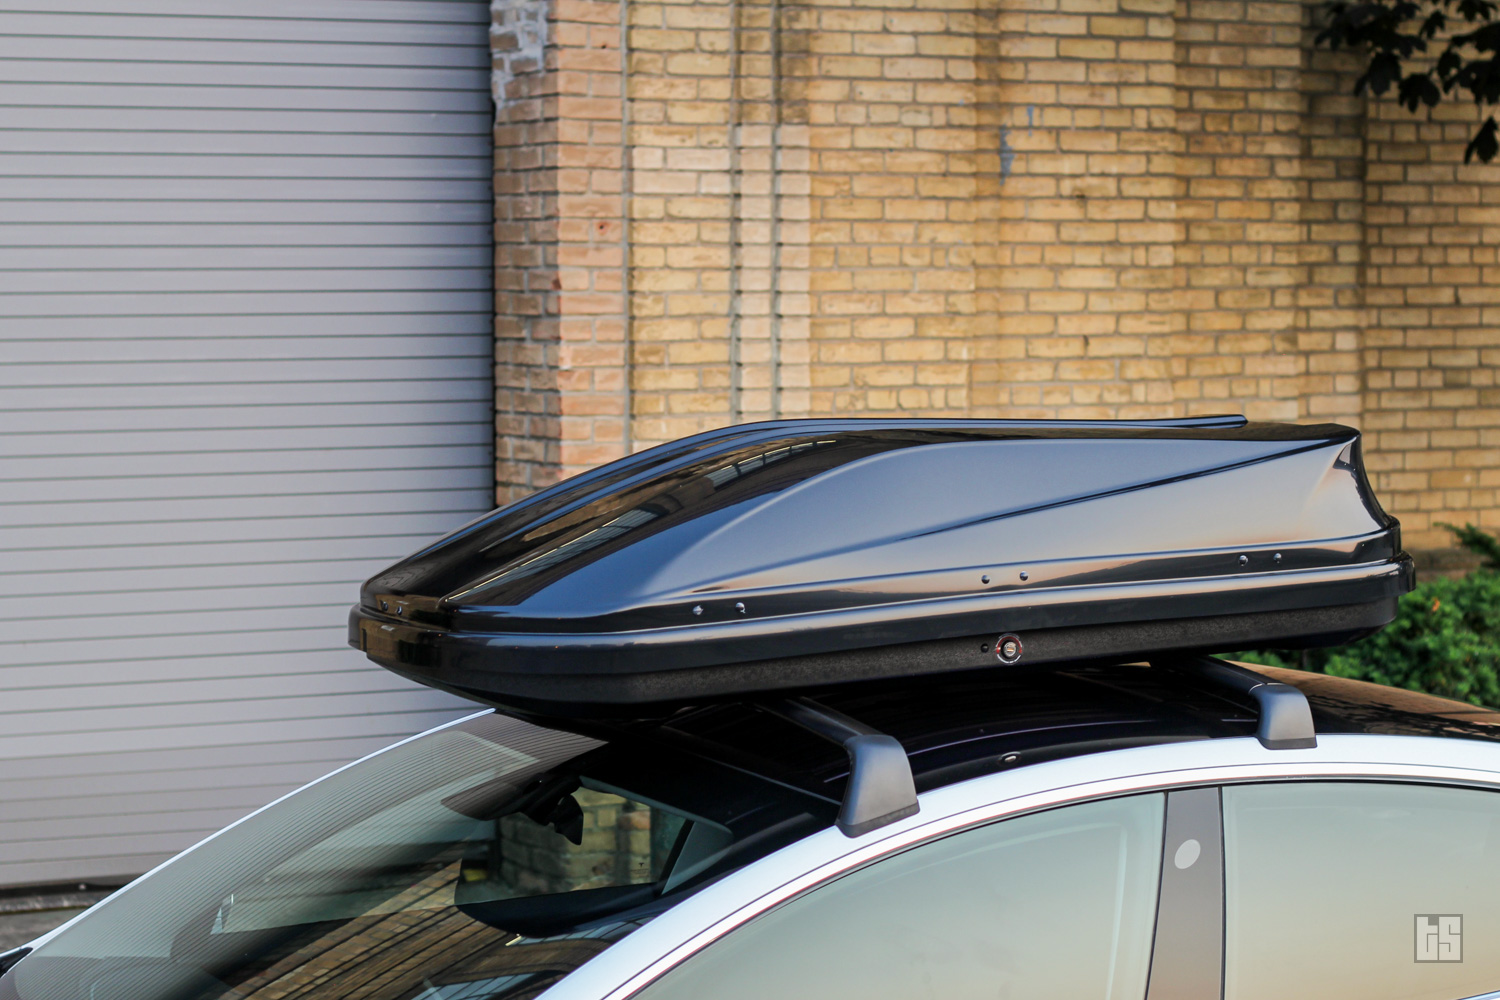 Model 3 rooftop cargo box System